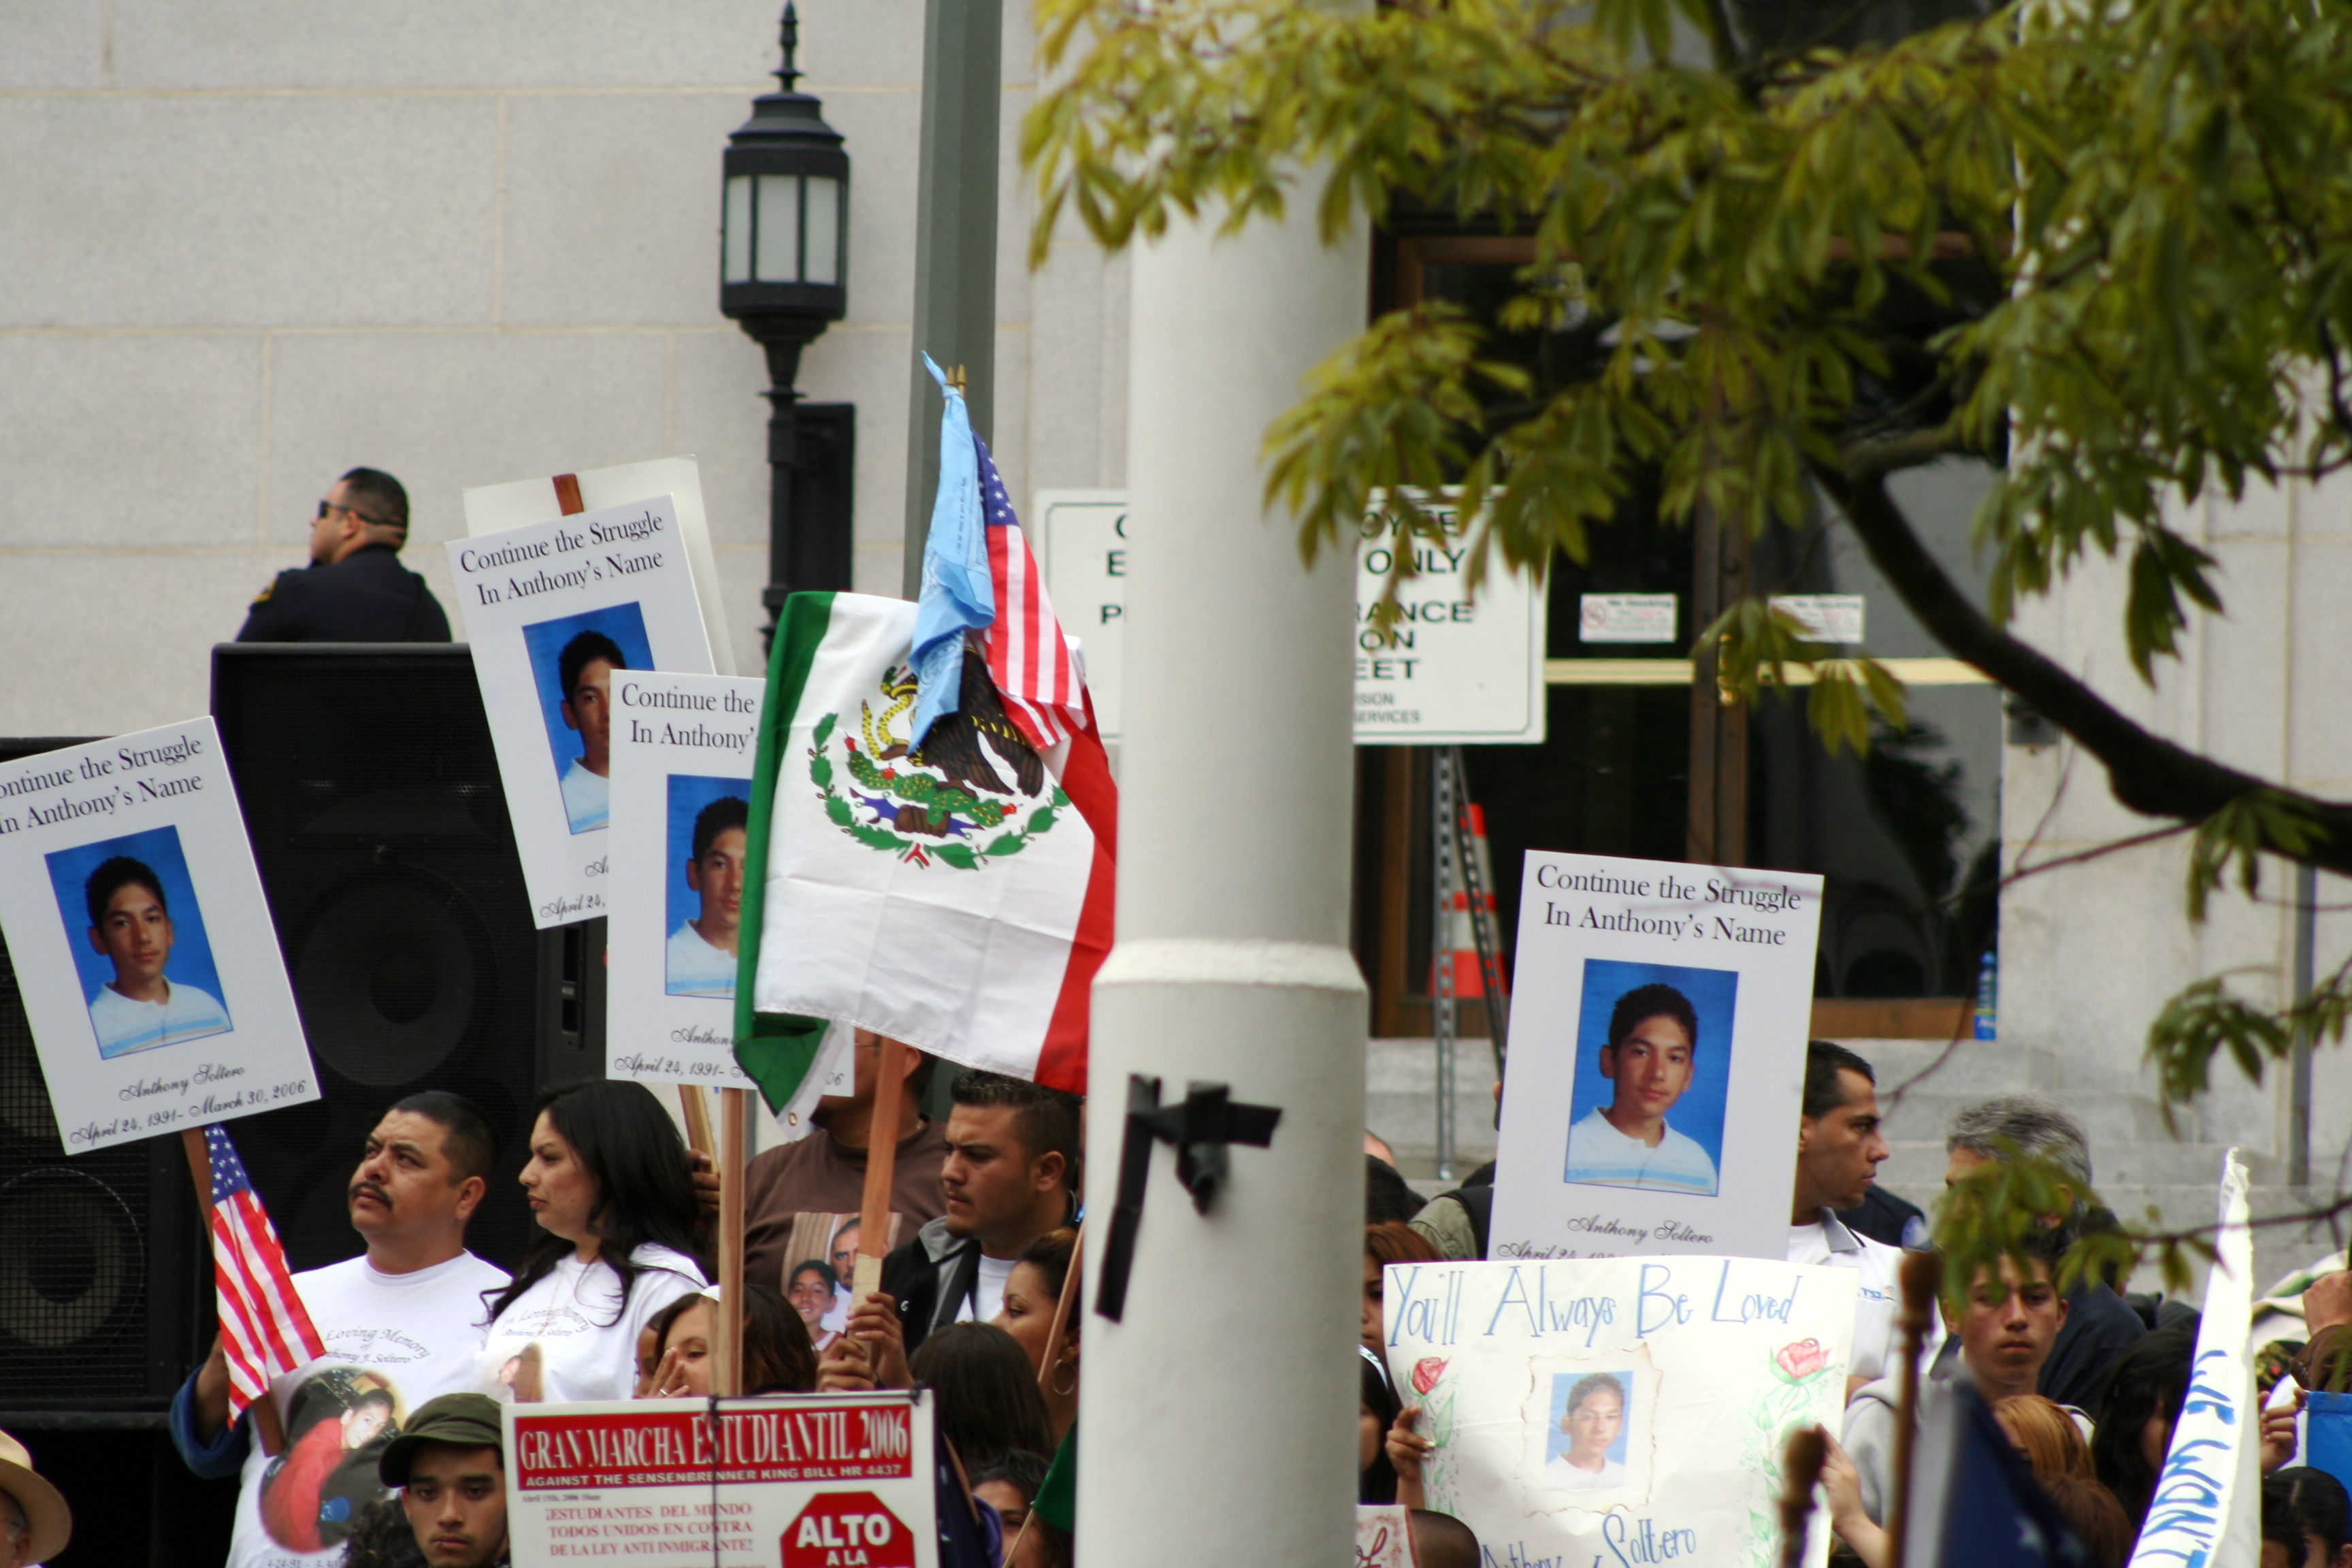 A group of people holding signs that read, “Continue the struggle in Anthony’s name” at an anti-HR 4437 march